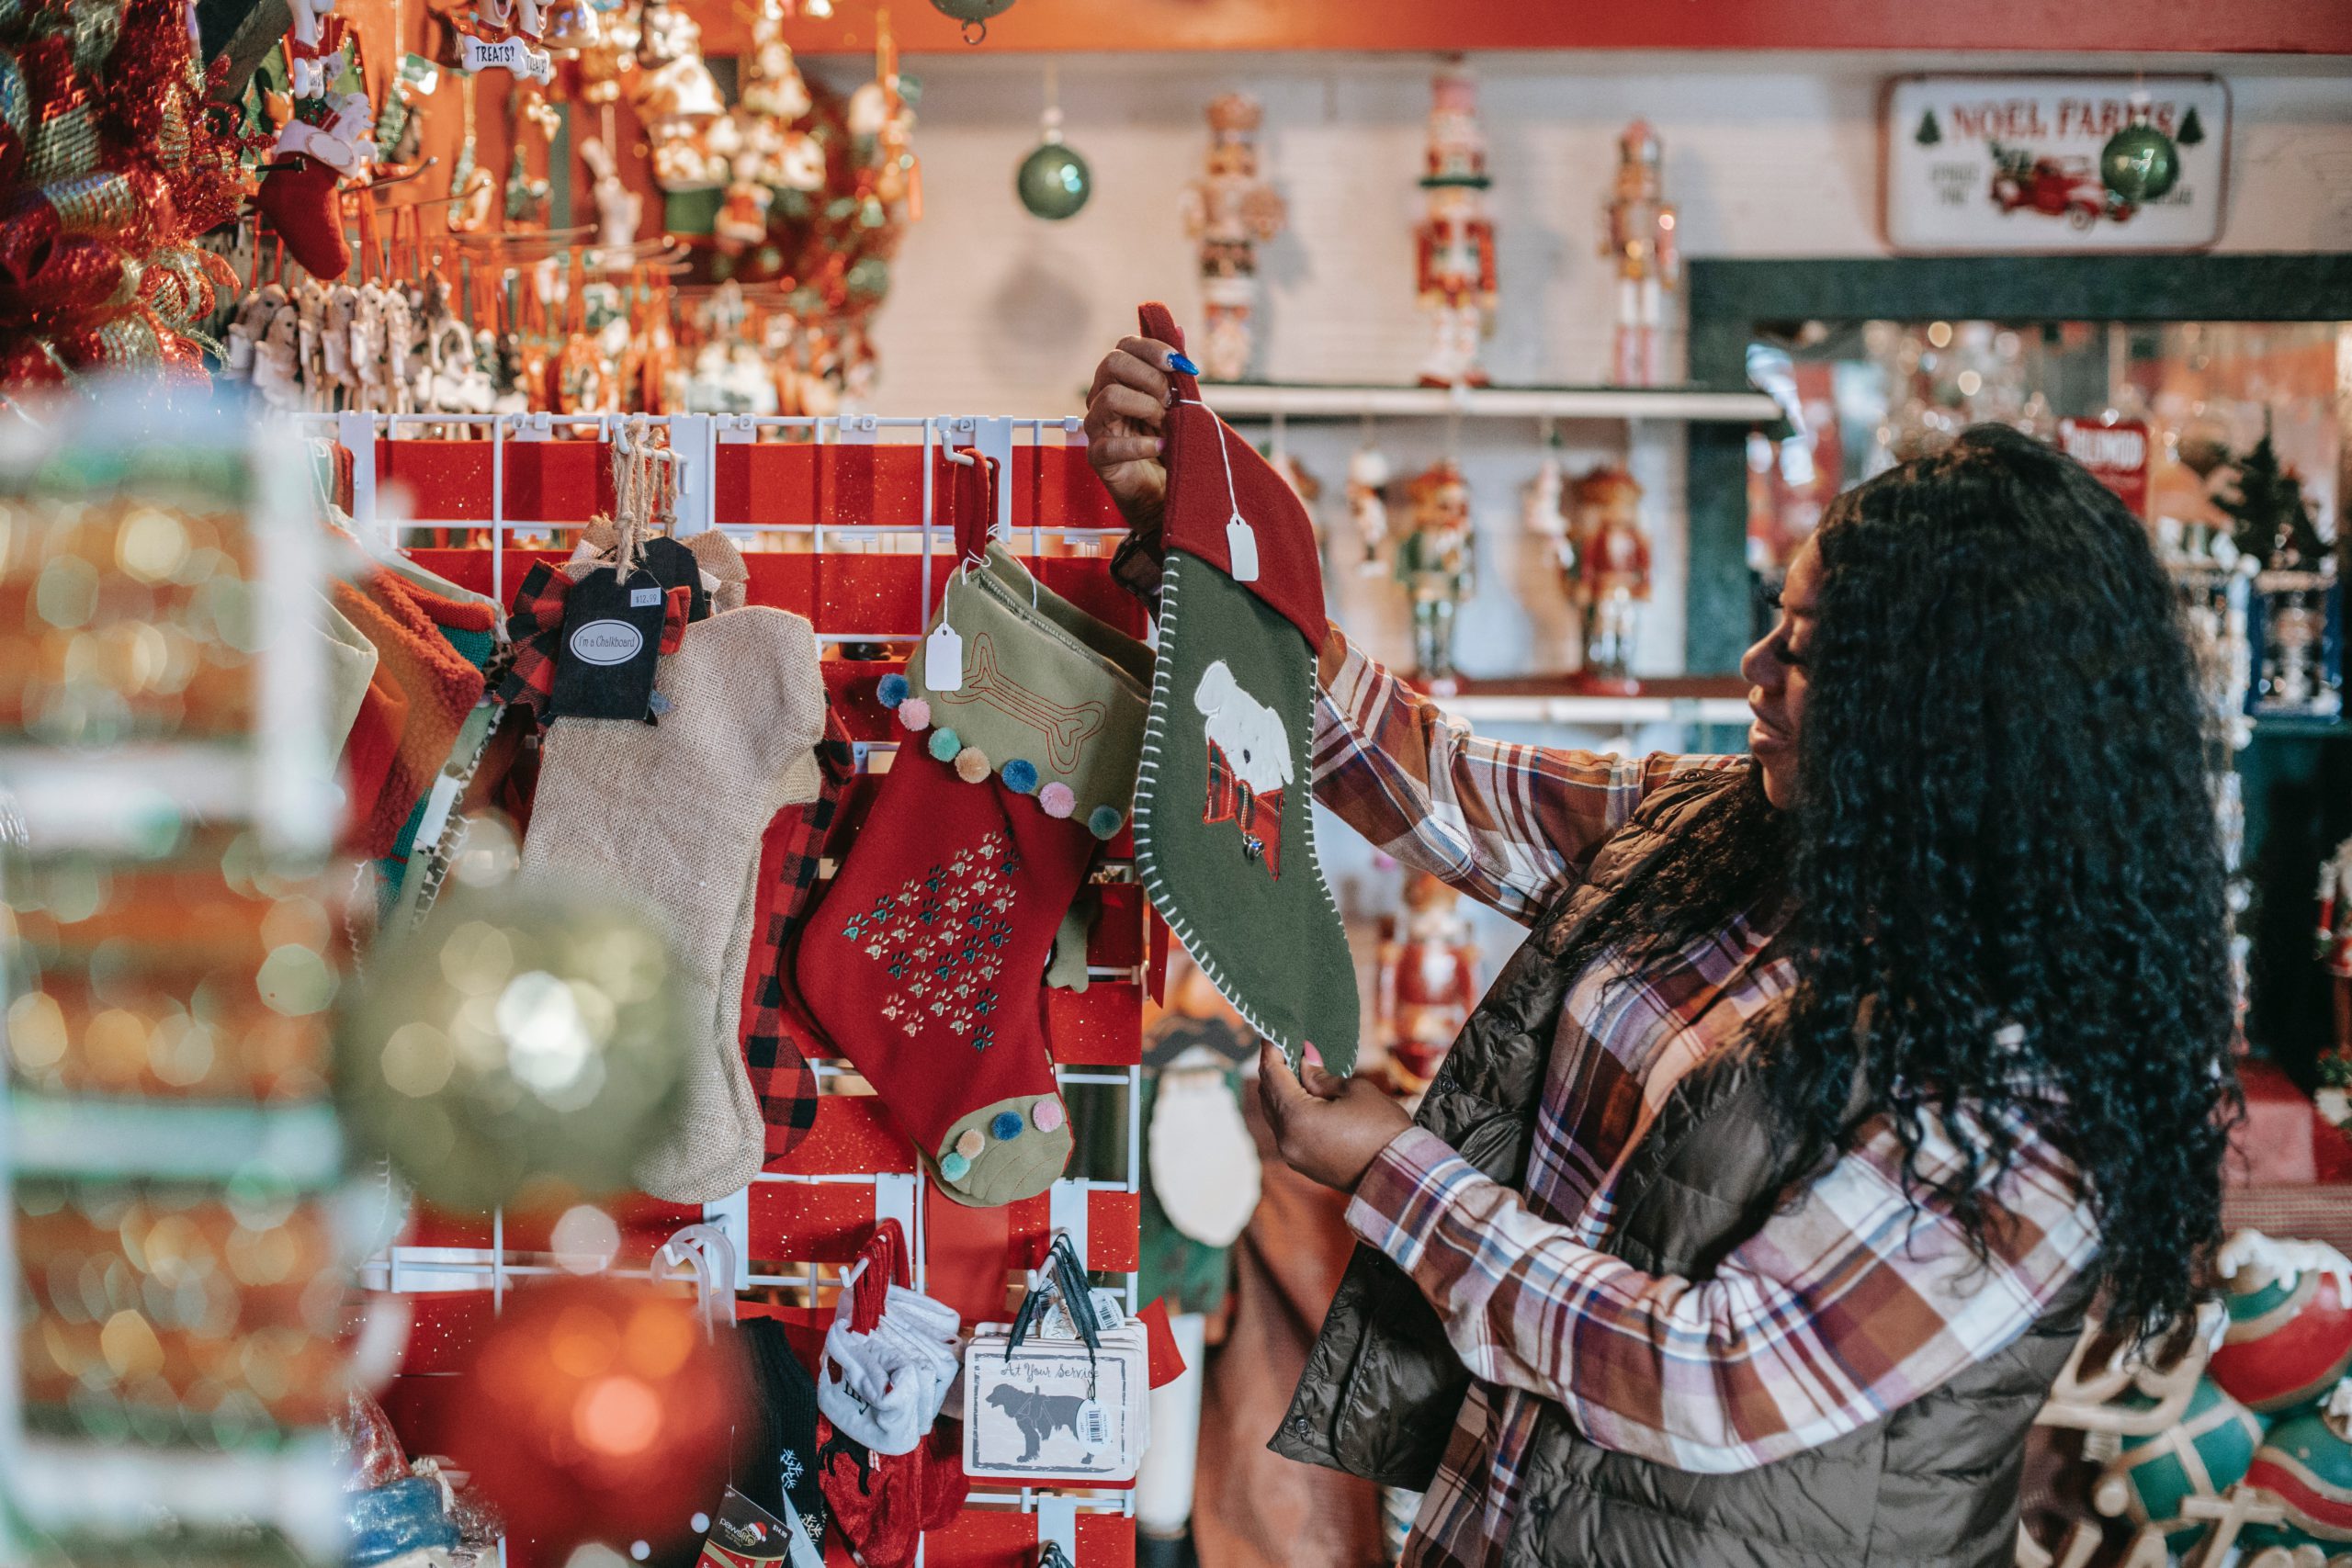 How to get your holiday shopping organized